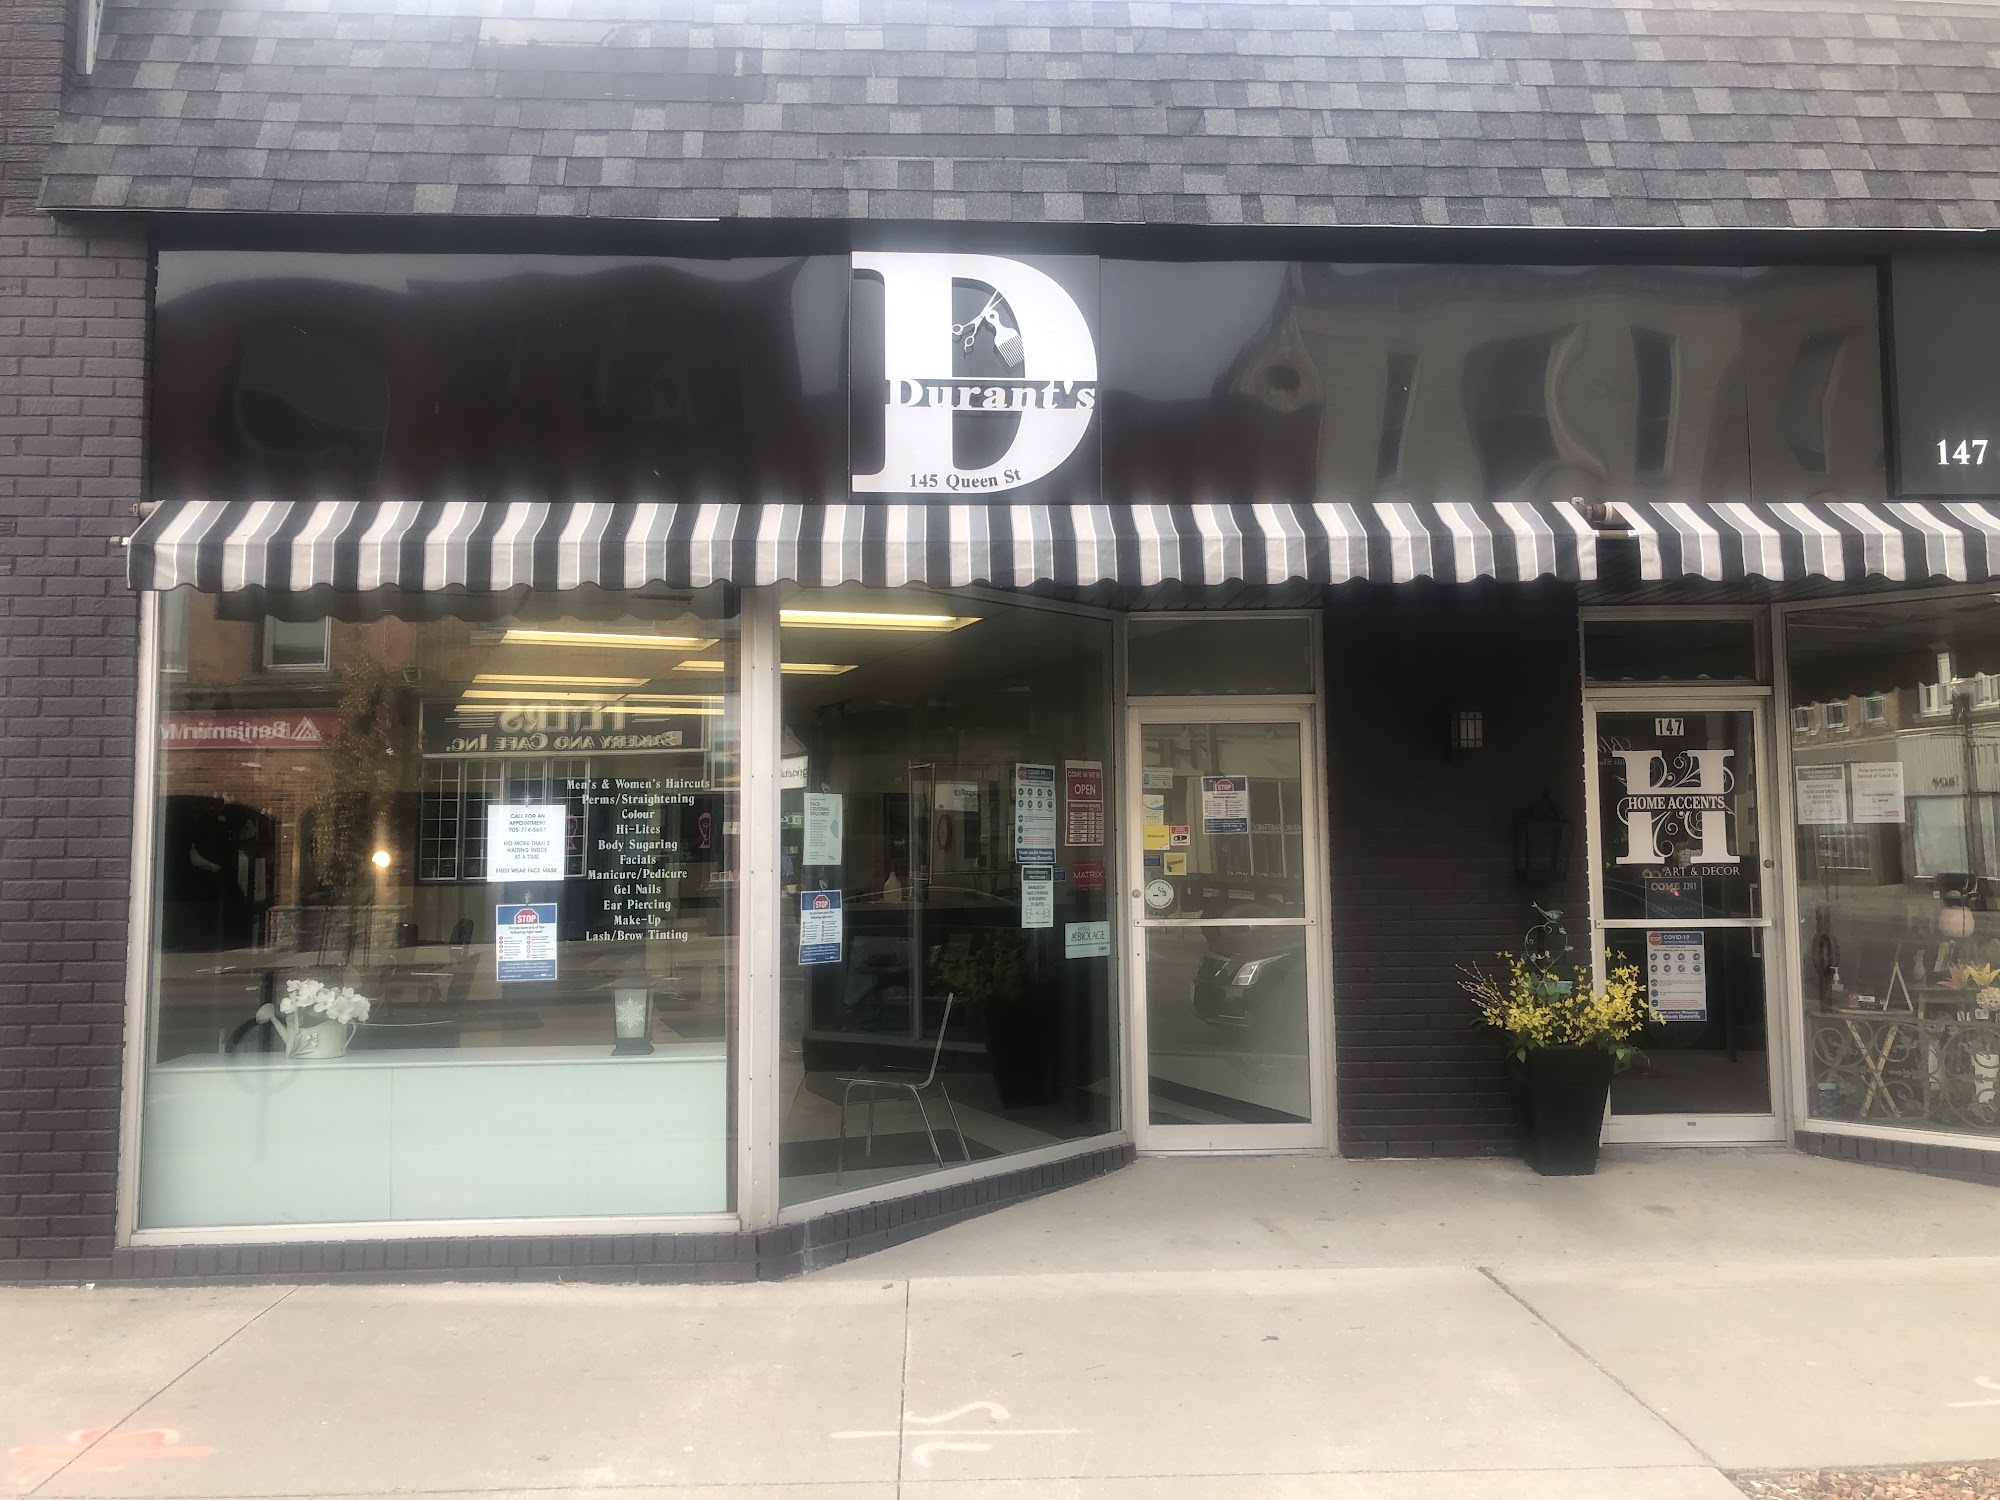 Durant's Hairstyling 145 Queen St, Dunnville Ontario N1A 1H6